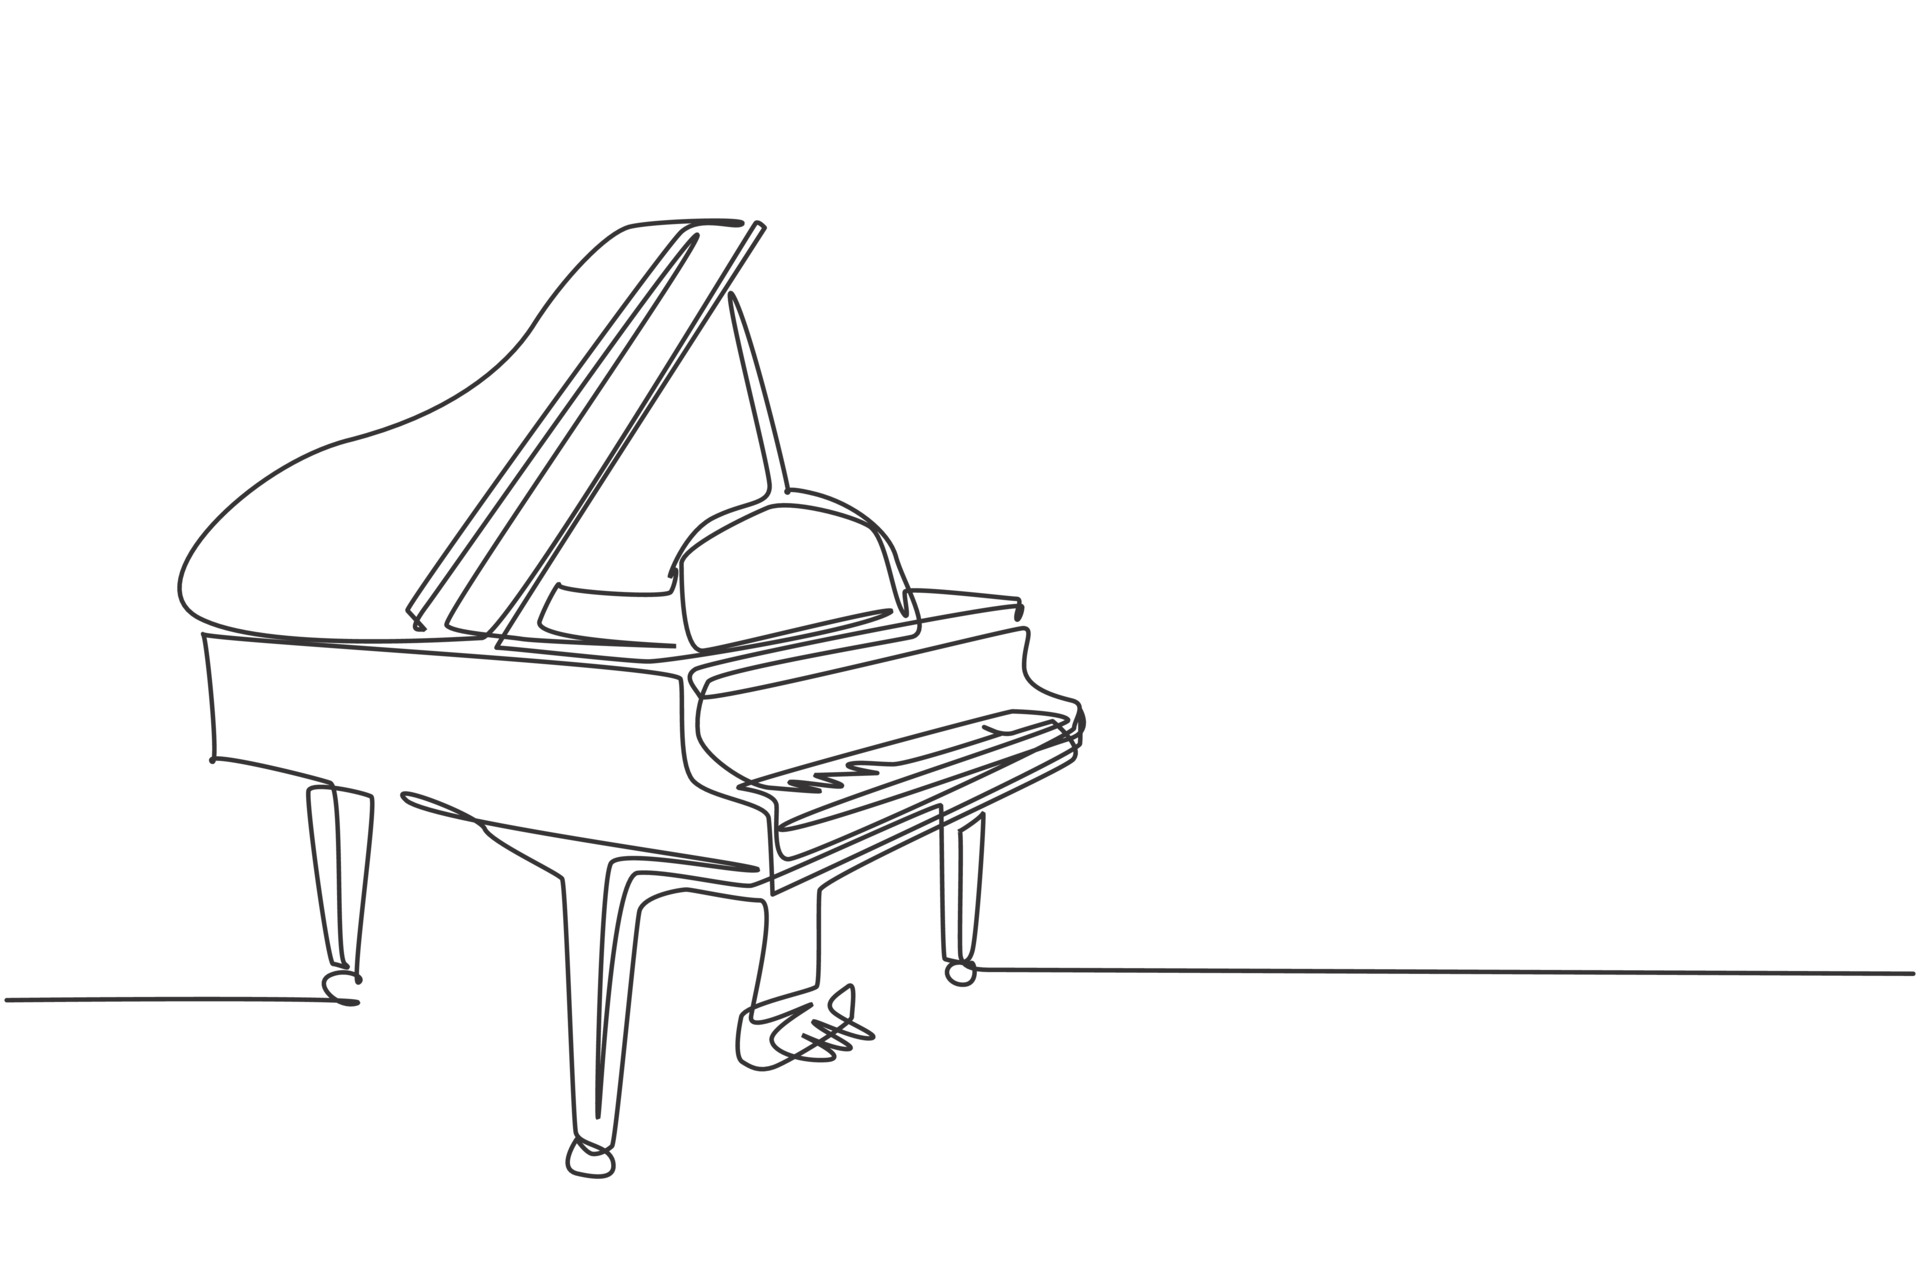 How to draw a Piano step by step  12 EASY Phase  Video